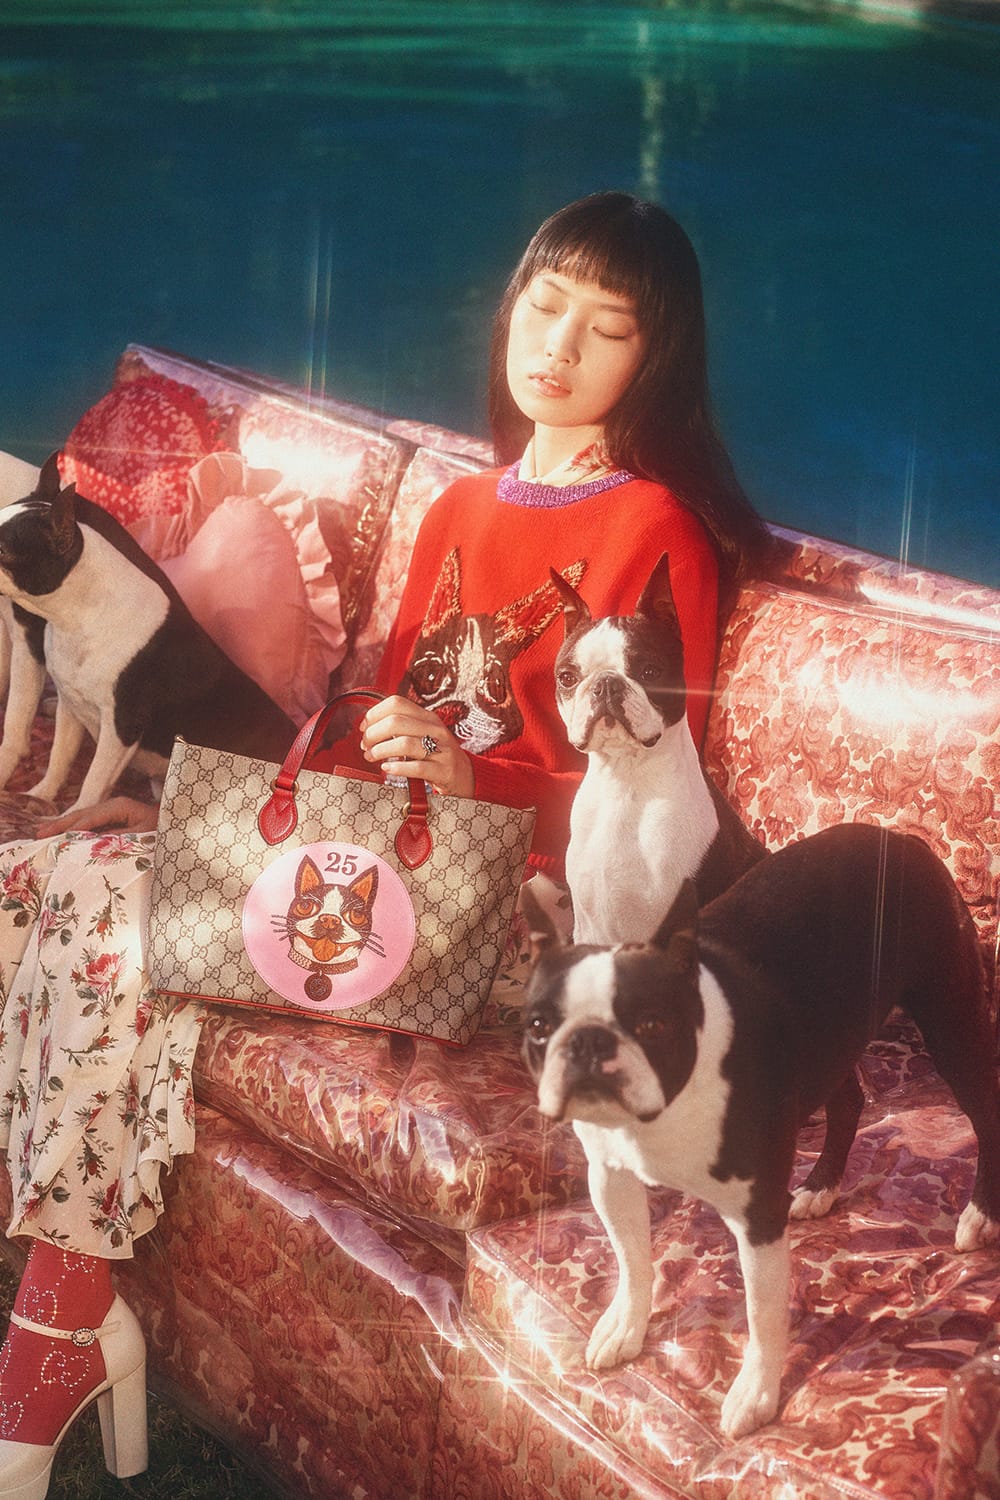 gucci dog collection